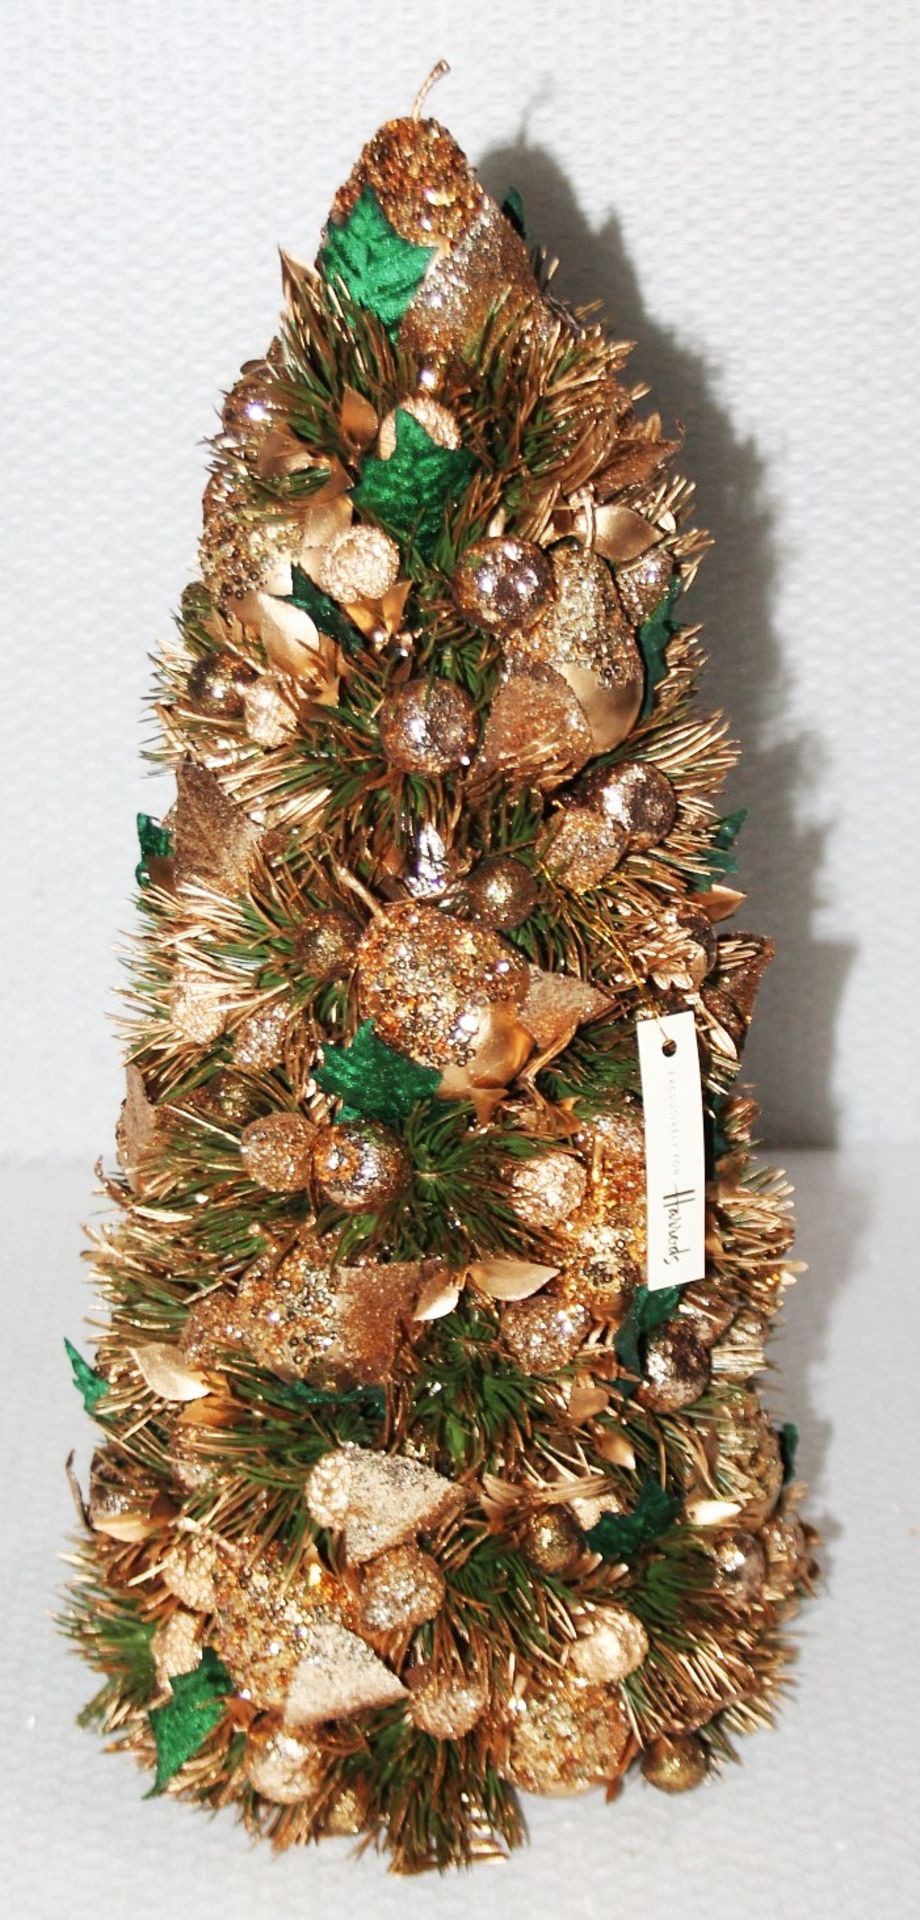 1 x SALZBURG CREATIONS Decorative 'Pear Tree' Ornament In Gold & Green - Original Price £300.00 - Image 8 of 9